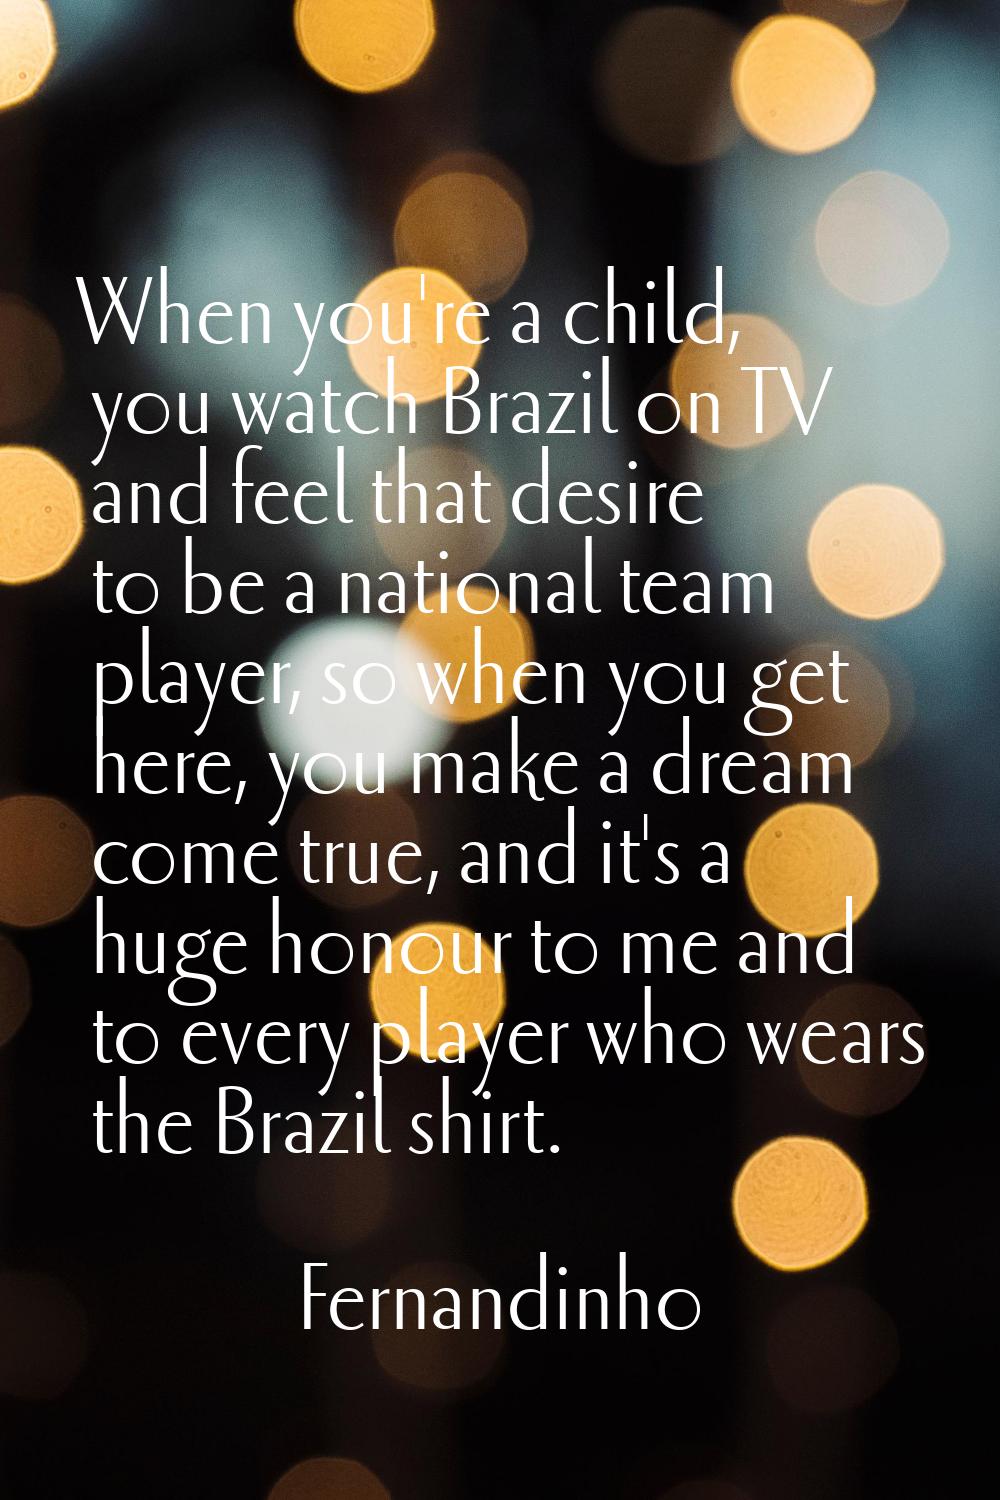 When you're a child, you watch Brazil on TV and feel that desire to be a national team player, so w